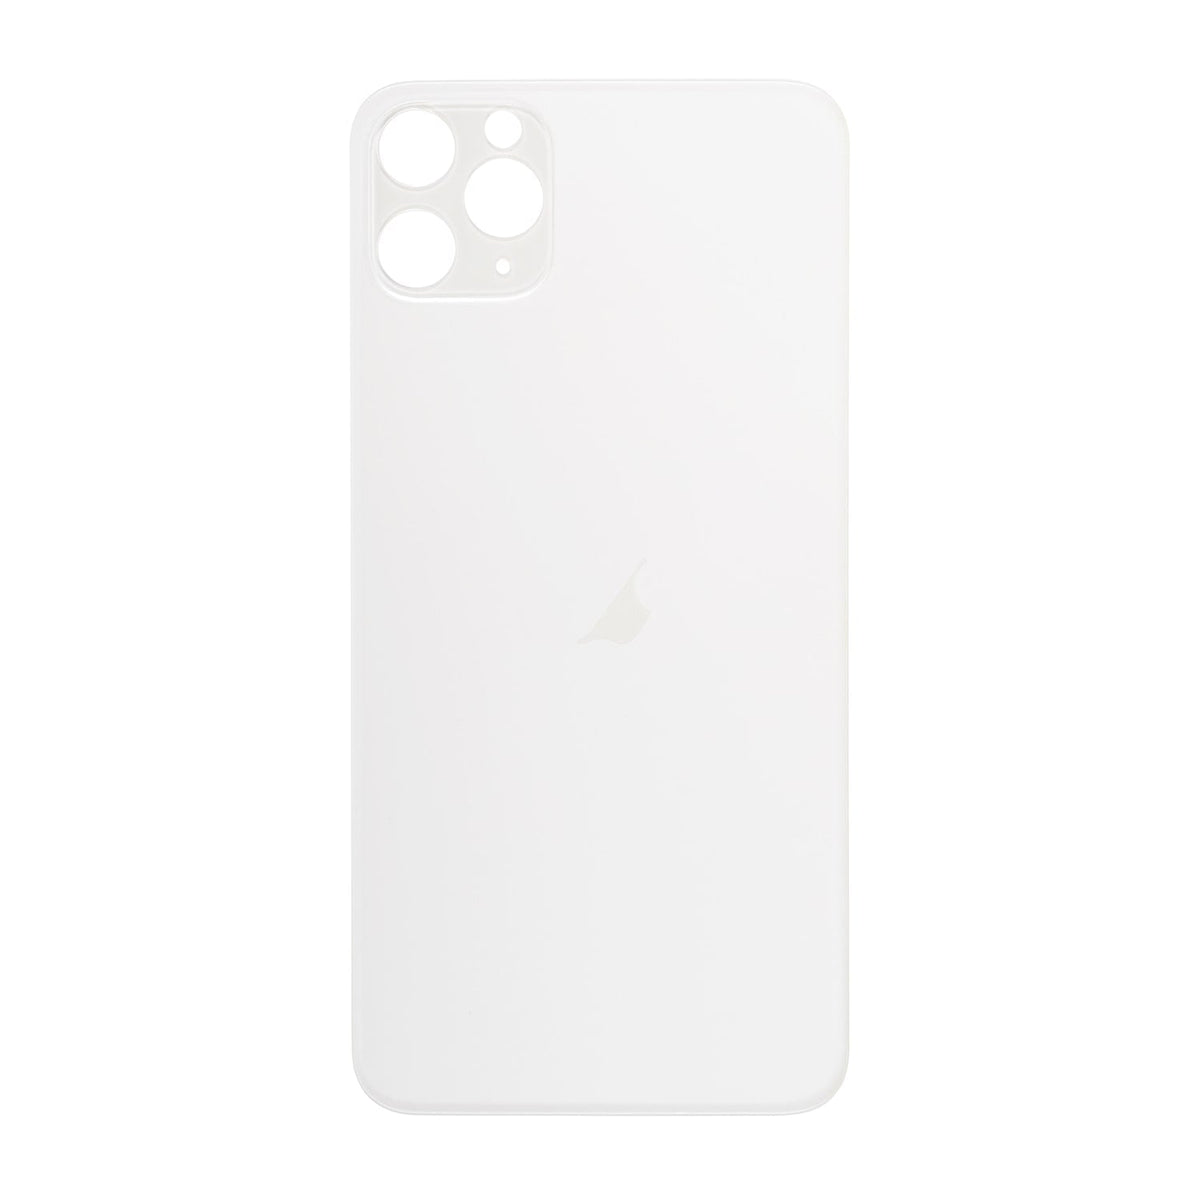 BACK COVER - SILVER FOR IPHONE 11 PRO MAX